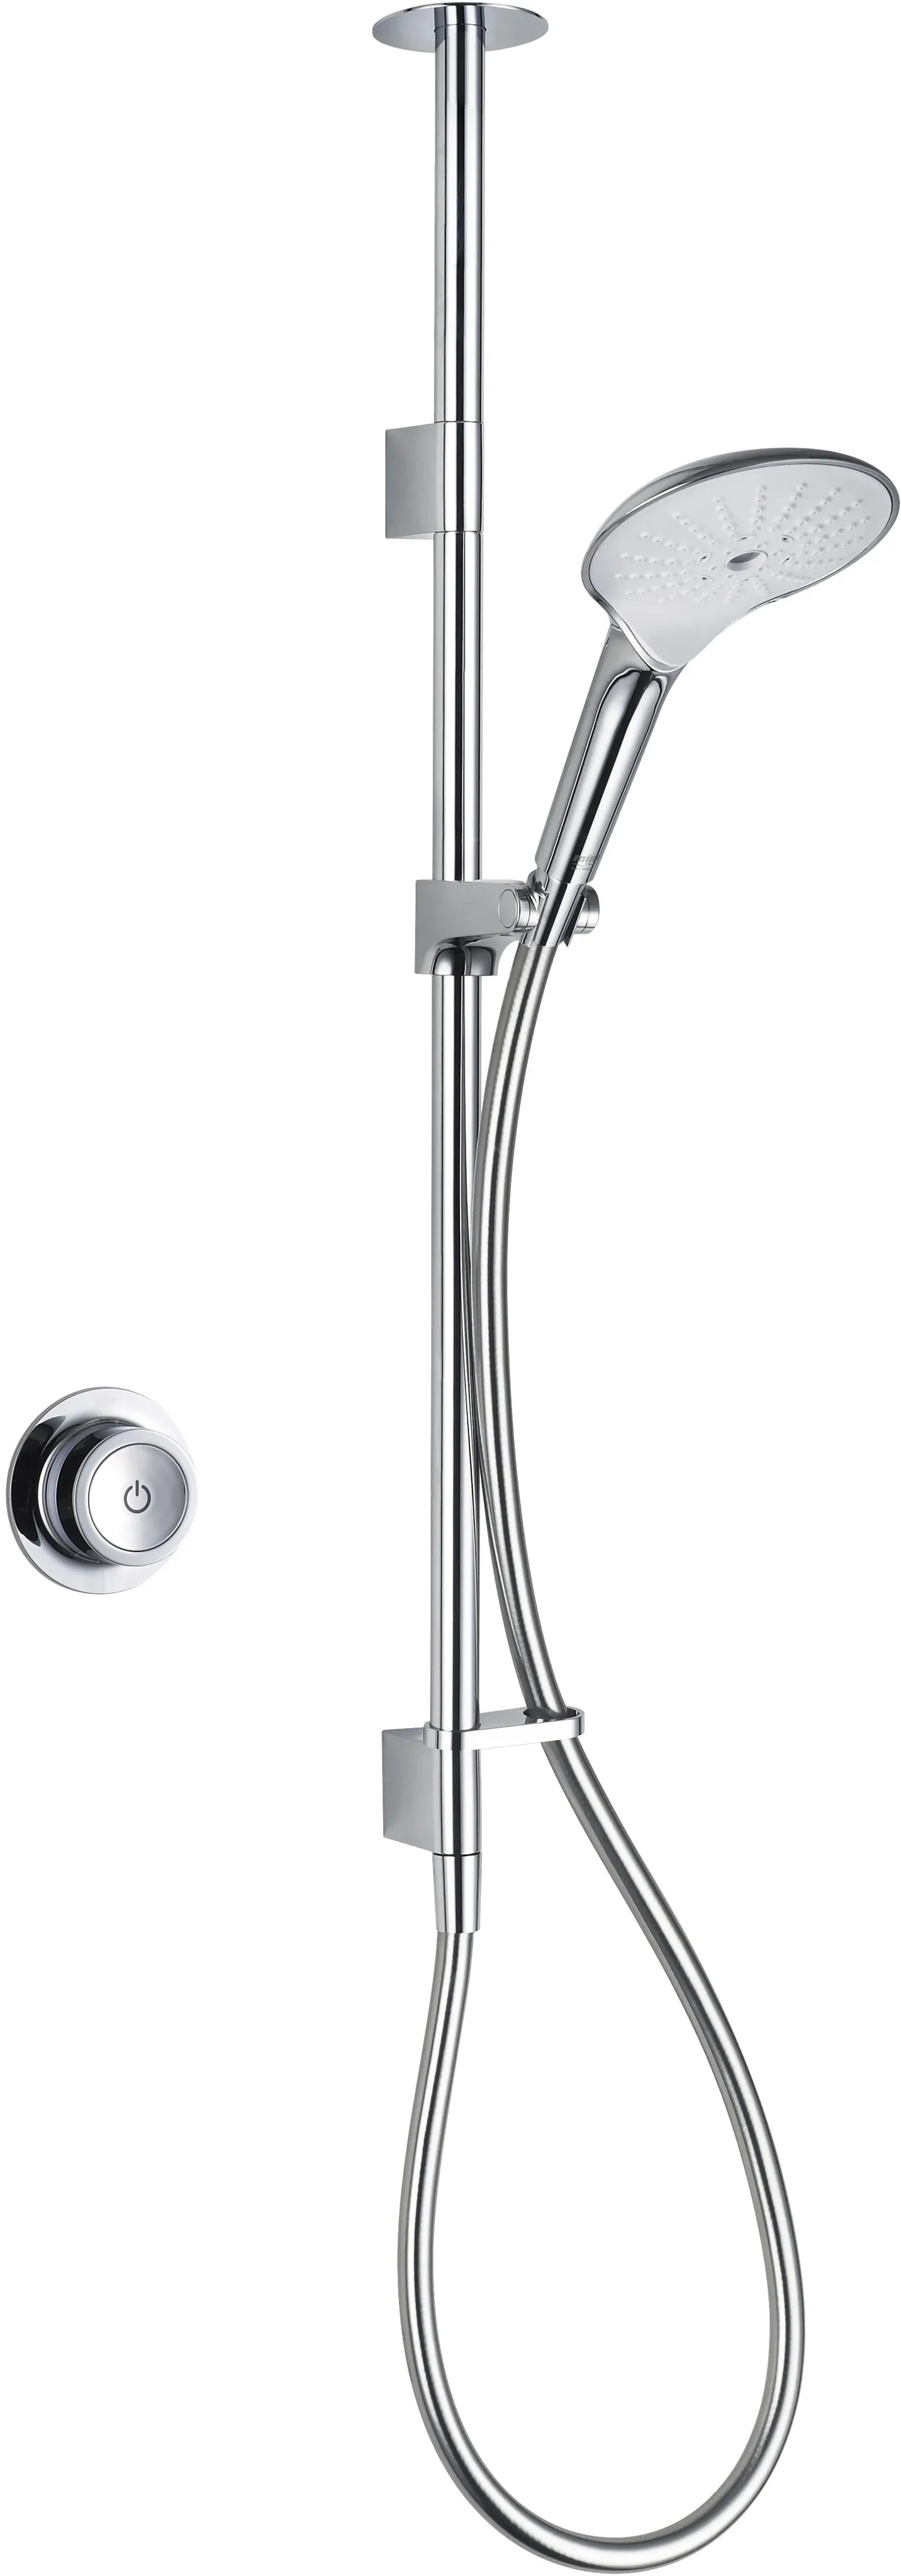 Mira Mode Thermostatic Shower Ceiling Fed Digital Shower - (Pumped for Gravity) - 1.1874.008